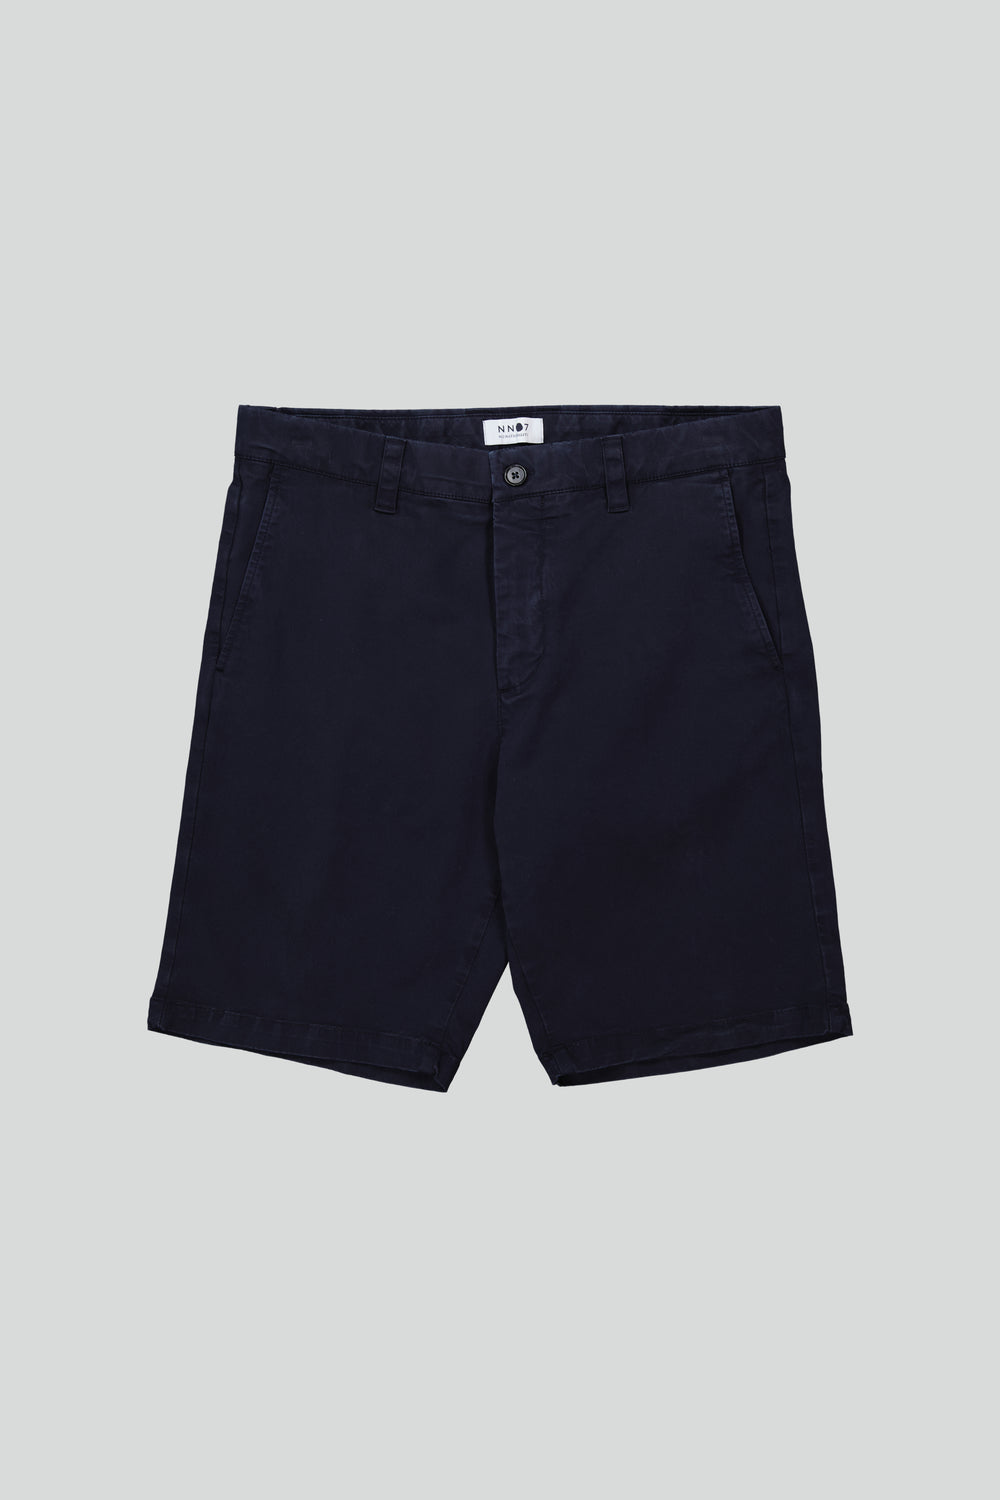 NN07 - Crown Shorts 1005 in Navy Blue | Buster McGee